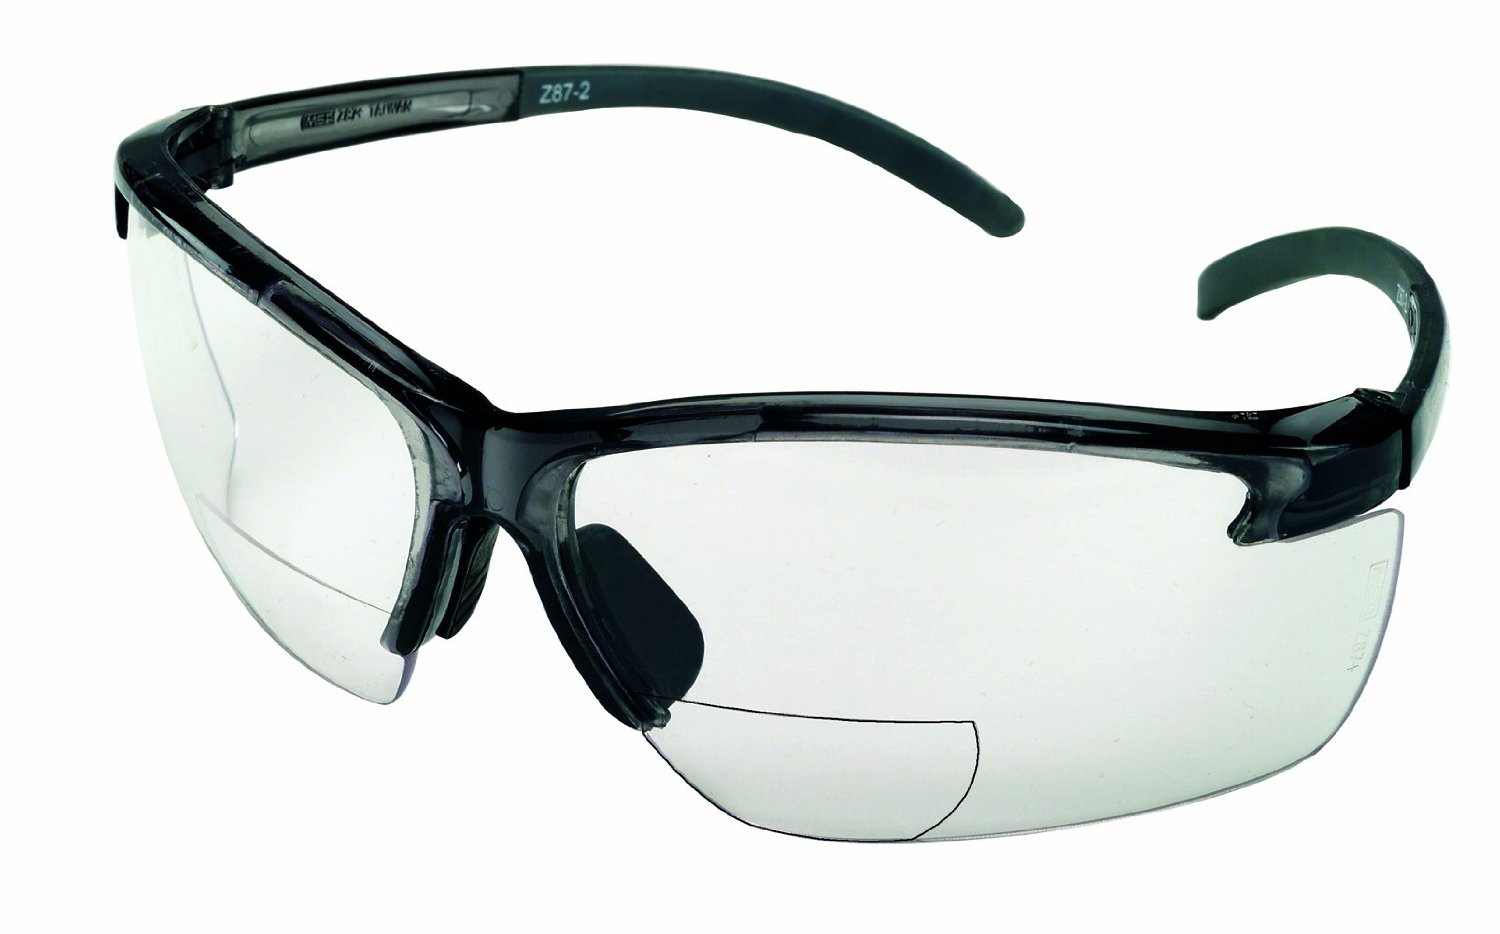 MSA Safety Glasses with 2.0 Diopeter